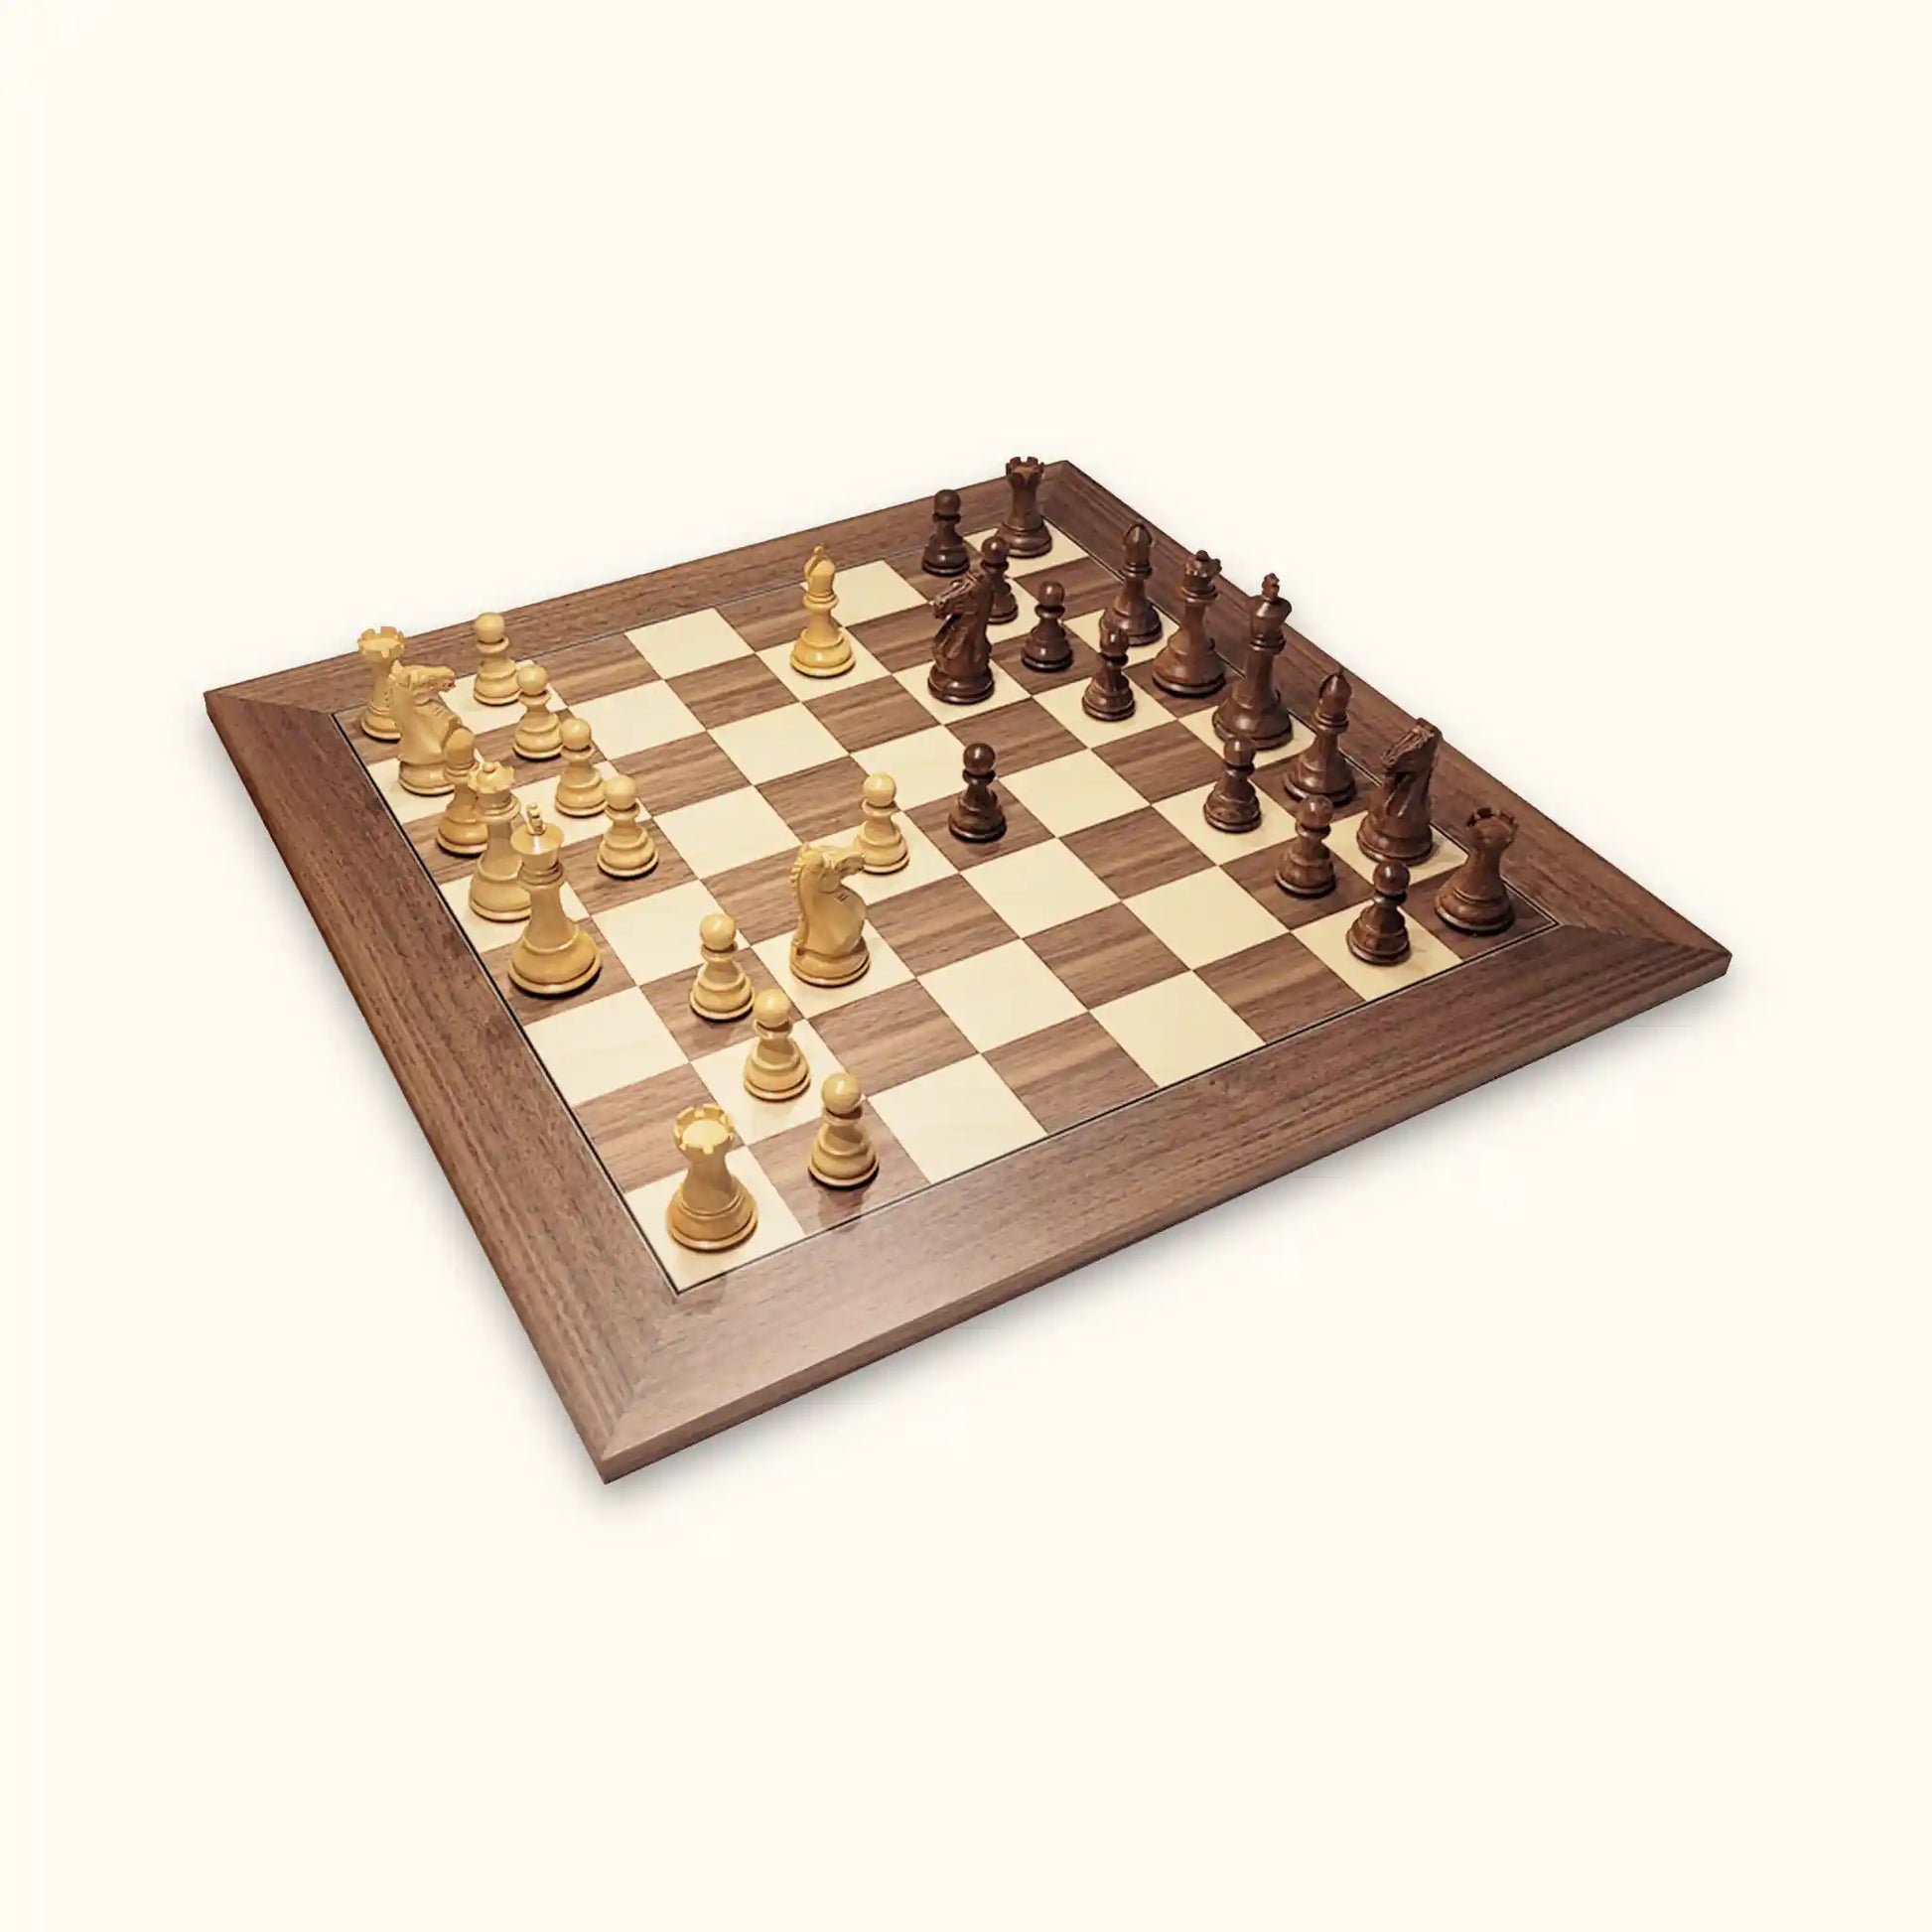 Chess set london at dawn with chess pieces supreme and chessboard walnut deluxe